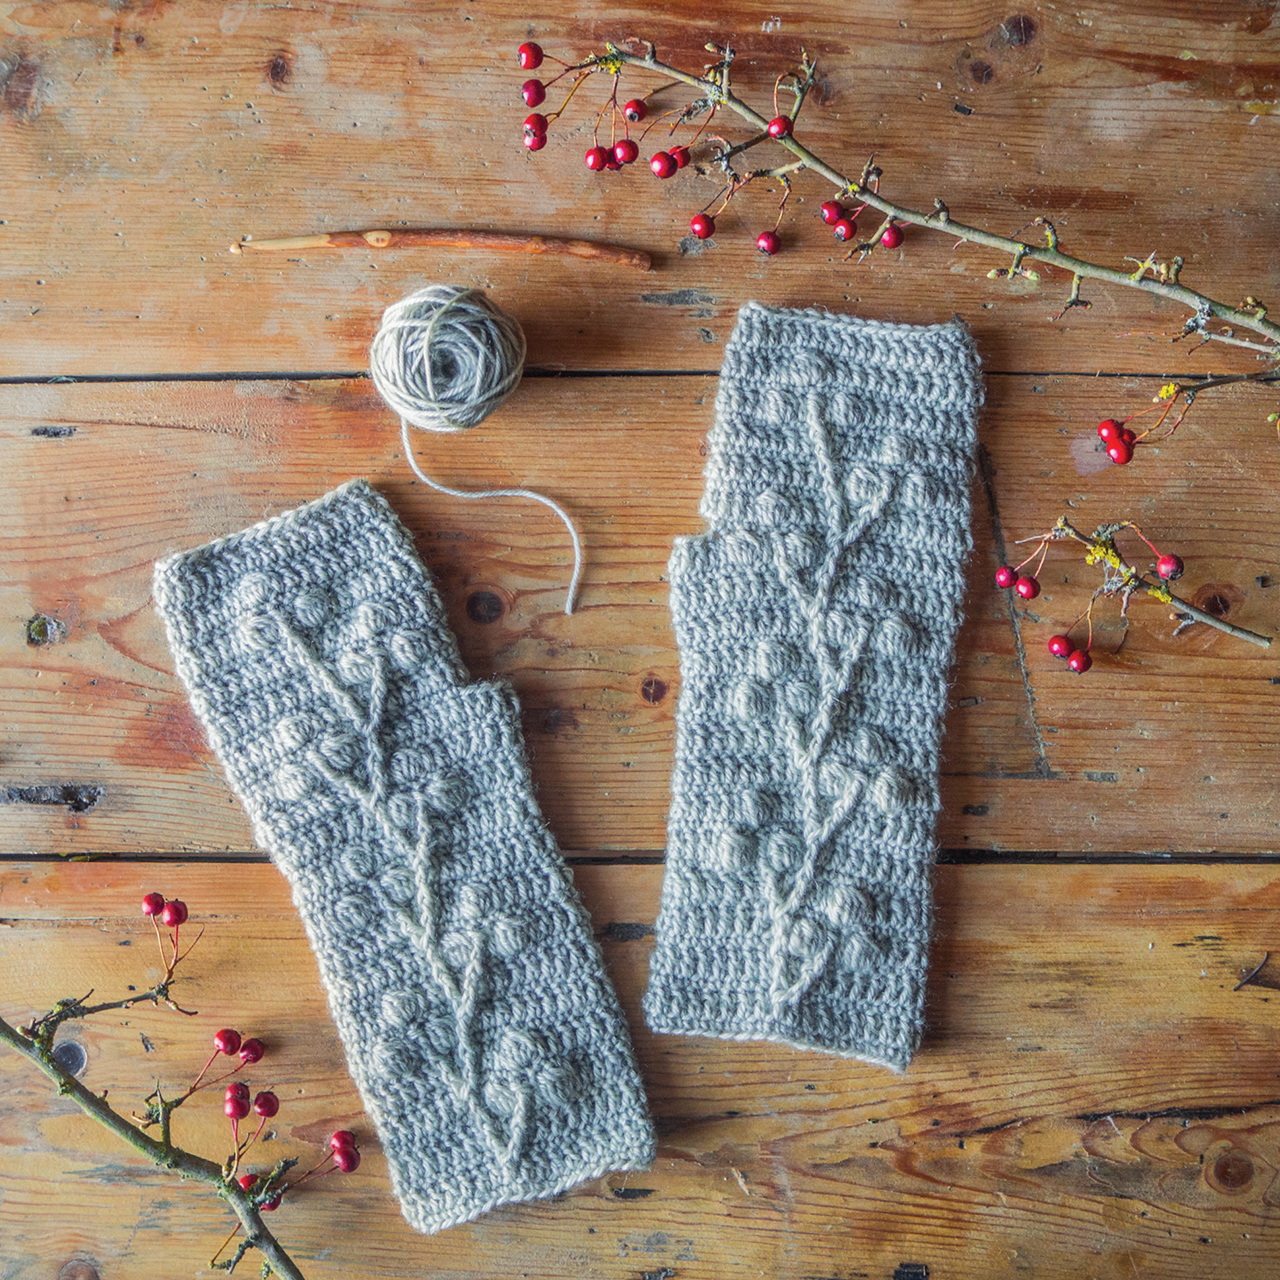 Hawthorn Wrist Warmers from 'Making Winter' by Emma Mitchell.